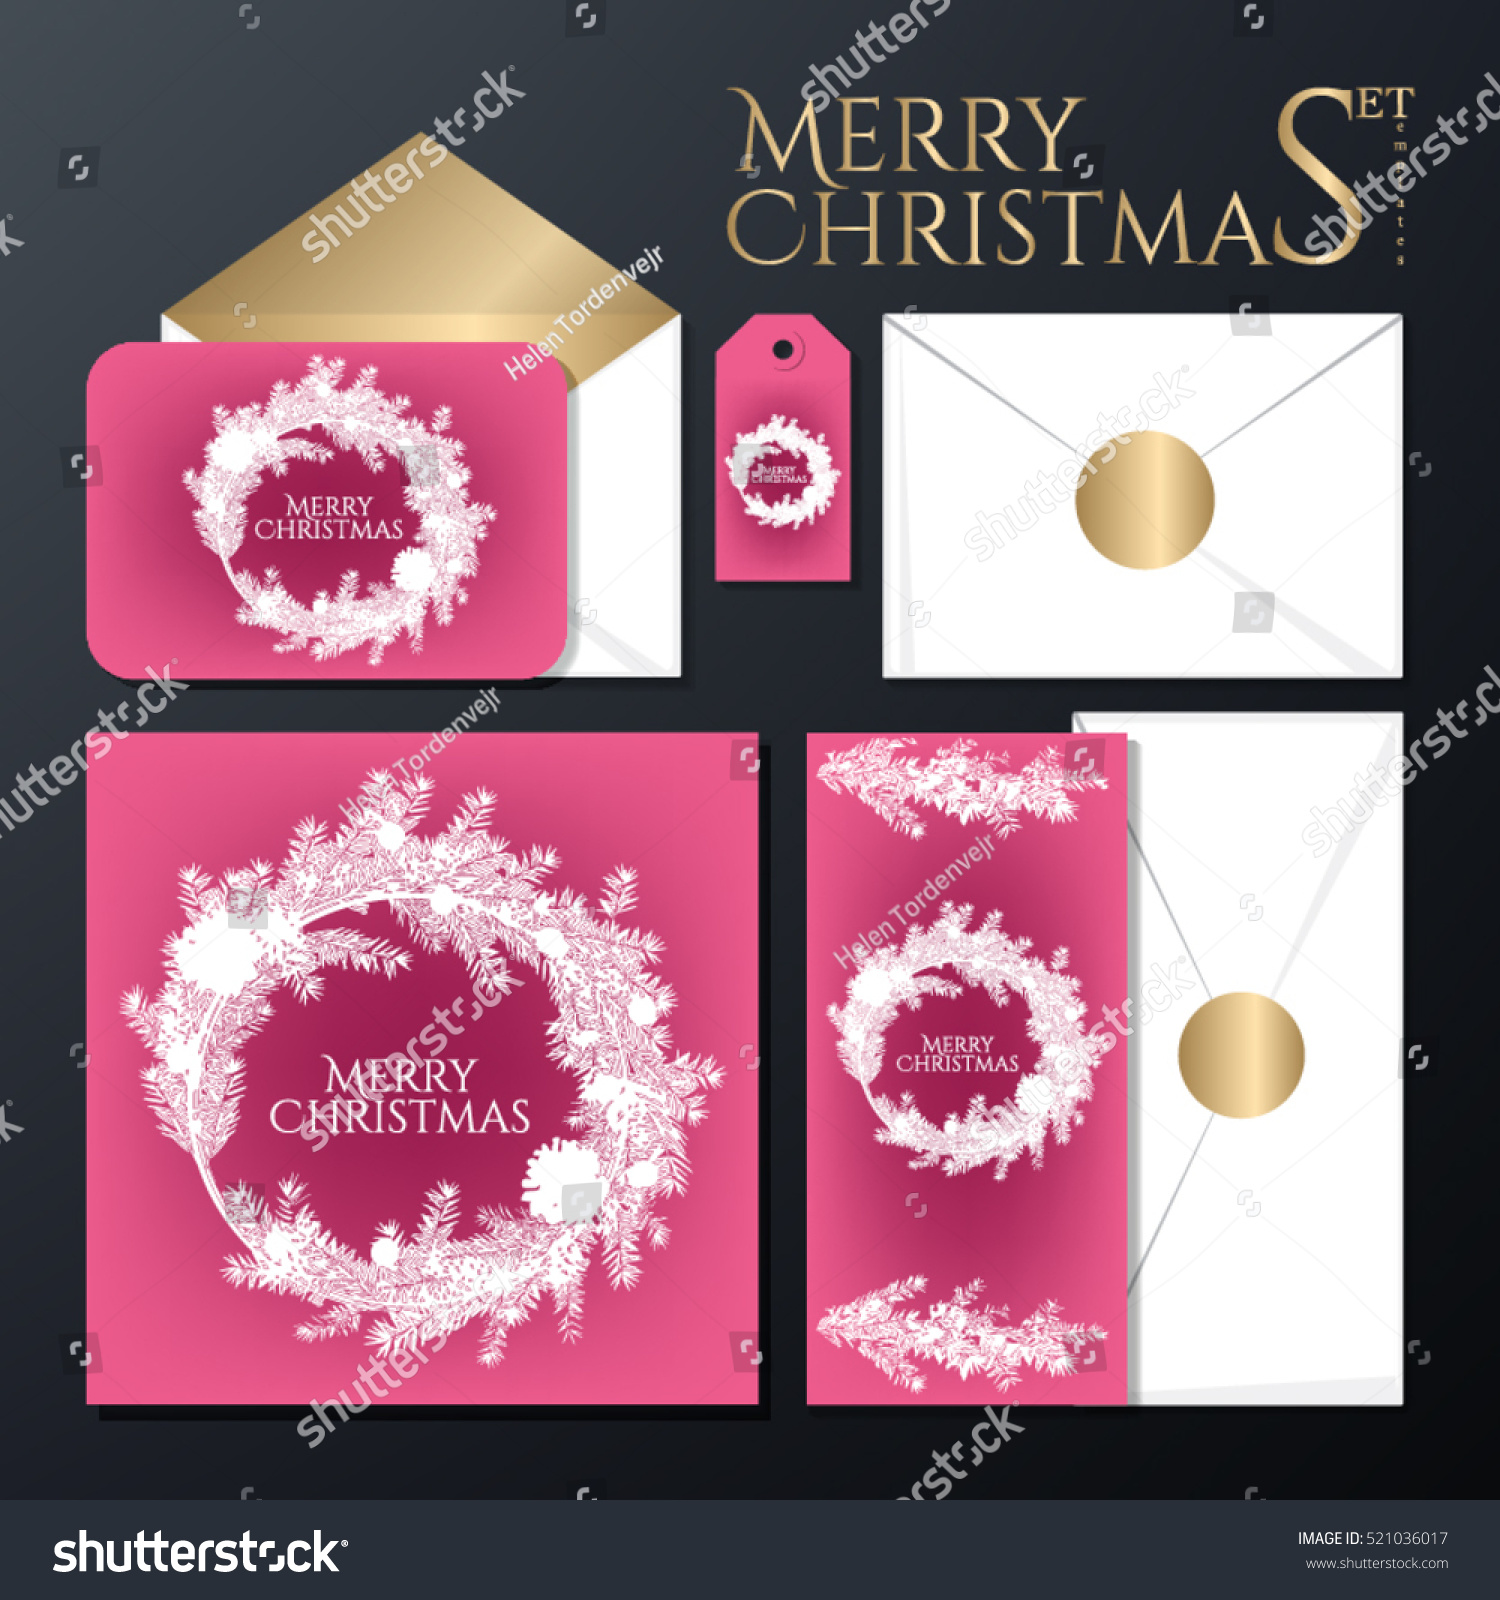 Merry Christmas Party Invitations Set Envelope Stock Vector (Royalty ...